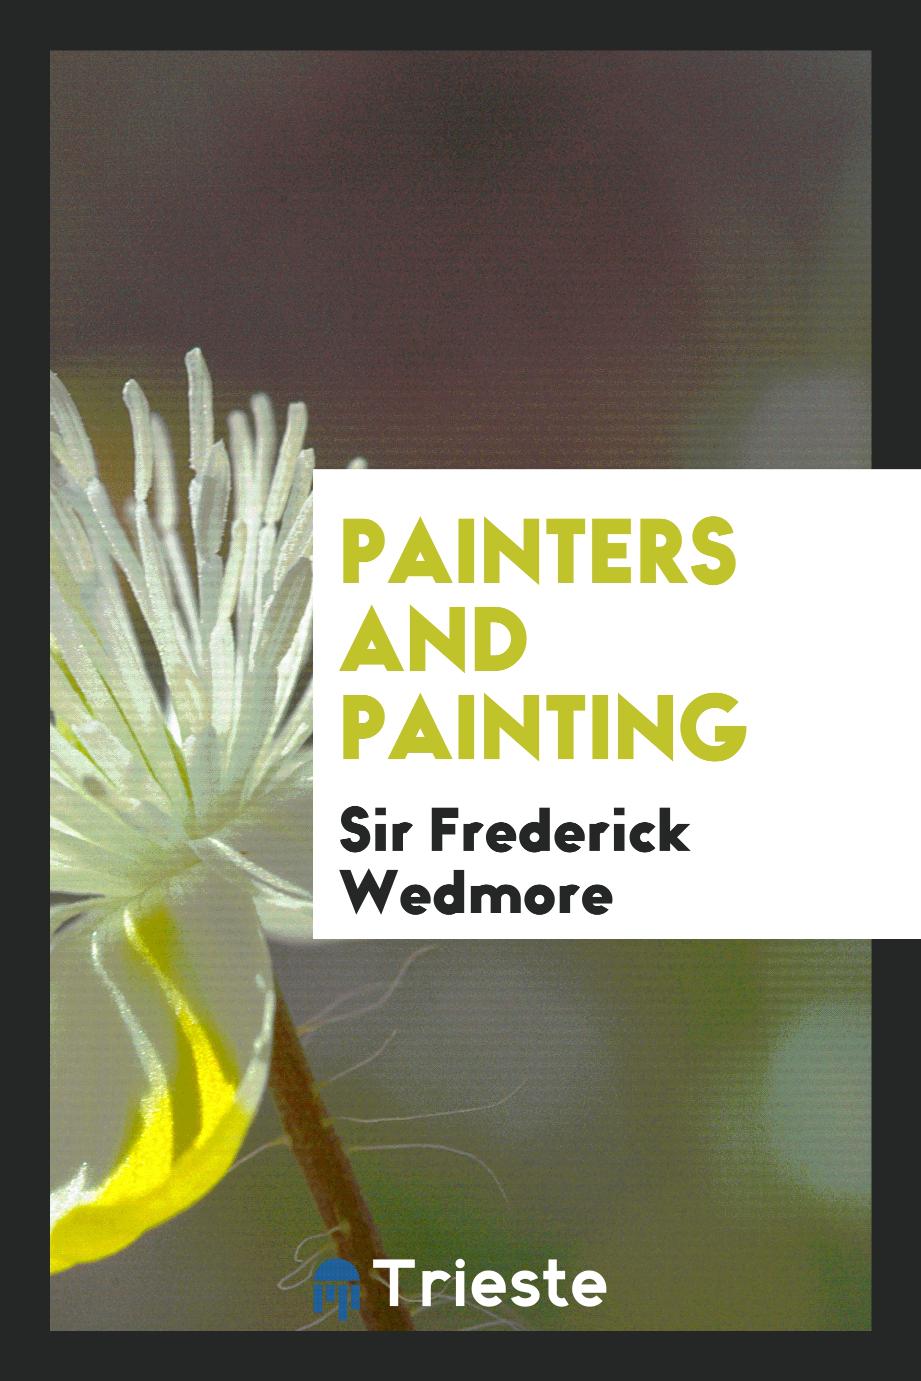 Painters and painting